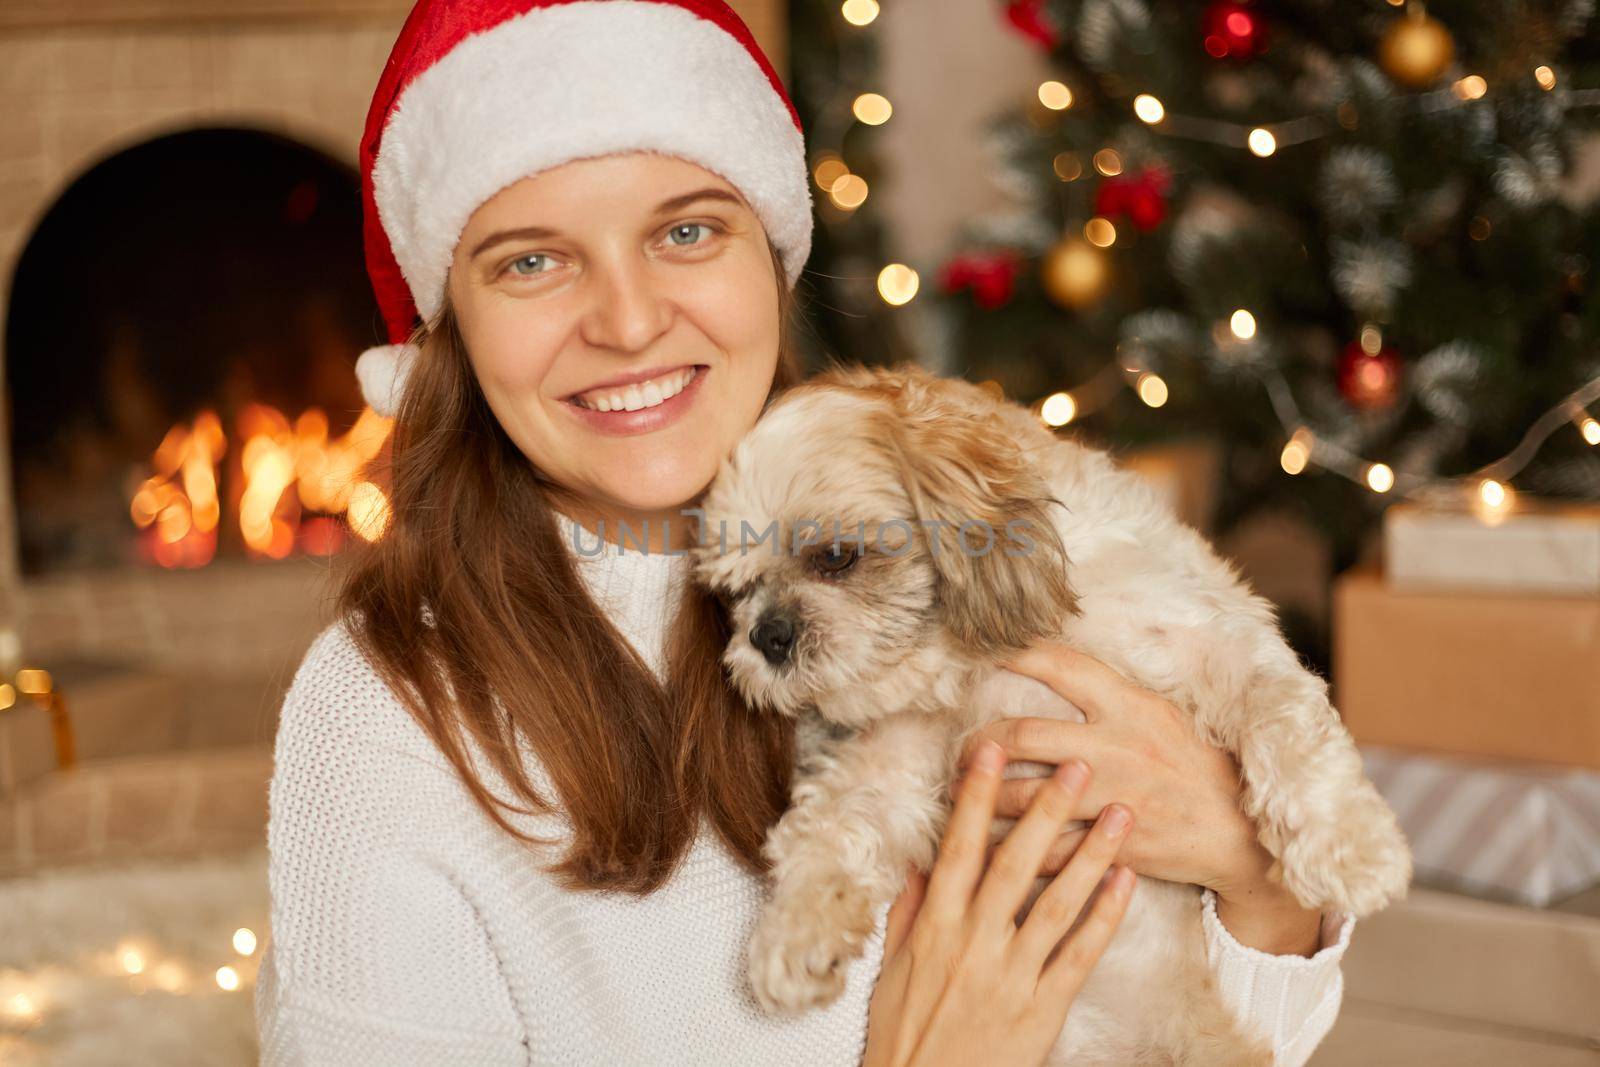 Holidays with lovely pet, woman with Pekingese dog, celebrate Christmas time or New Year at home, looks smiling directly at camera, posing indoor near x-mas tree and fireplace. by sementsovalesia